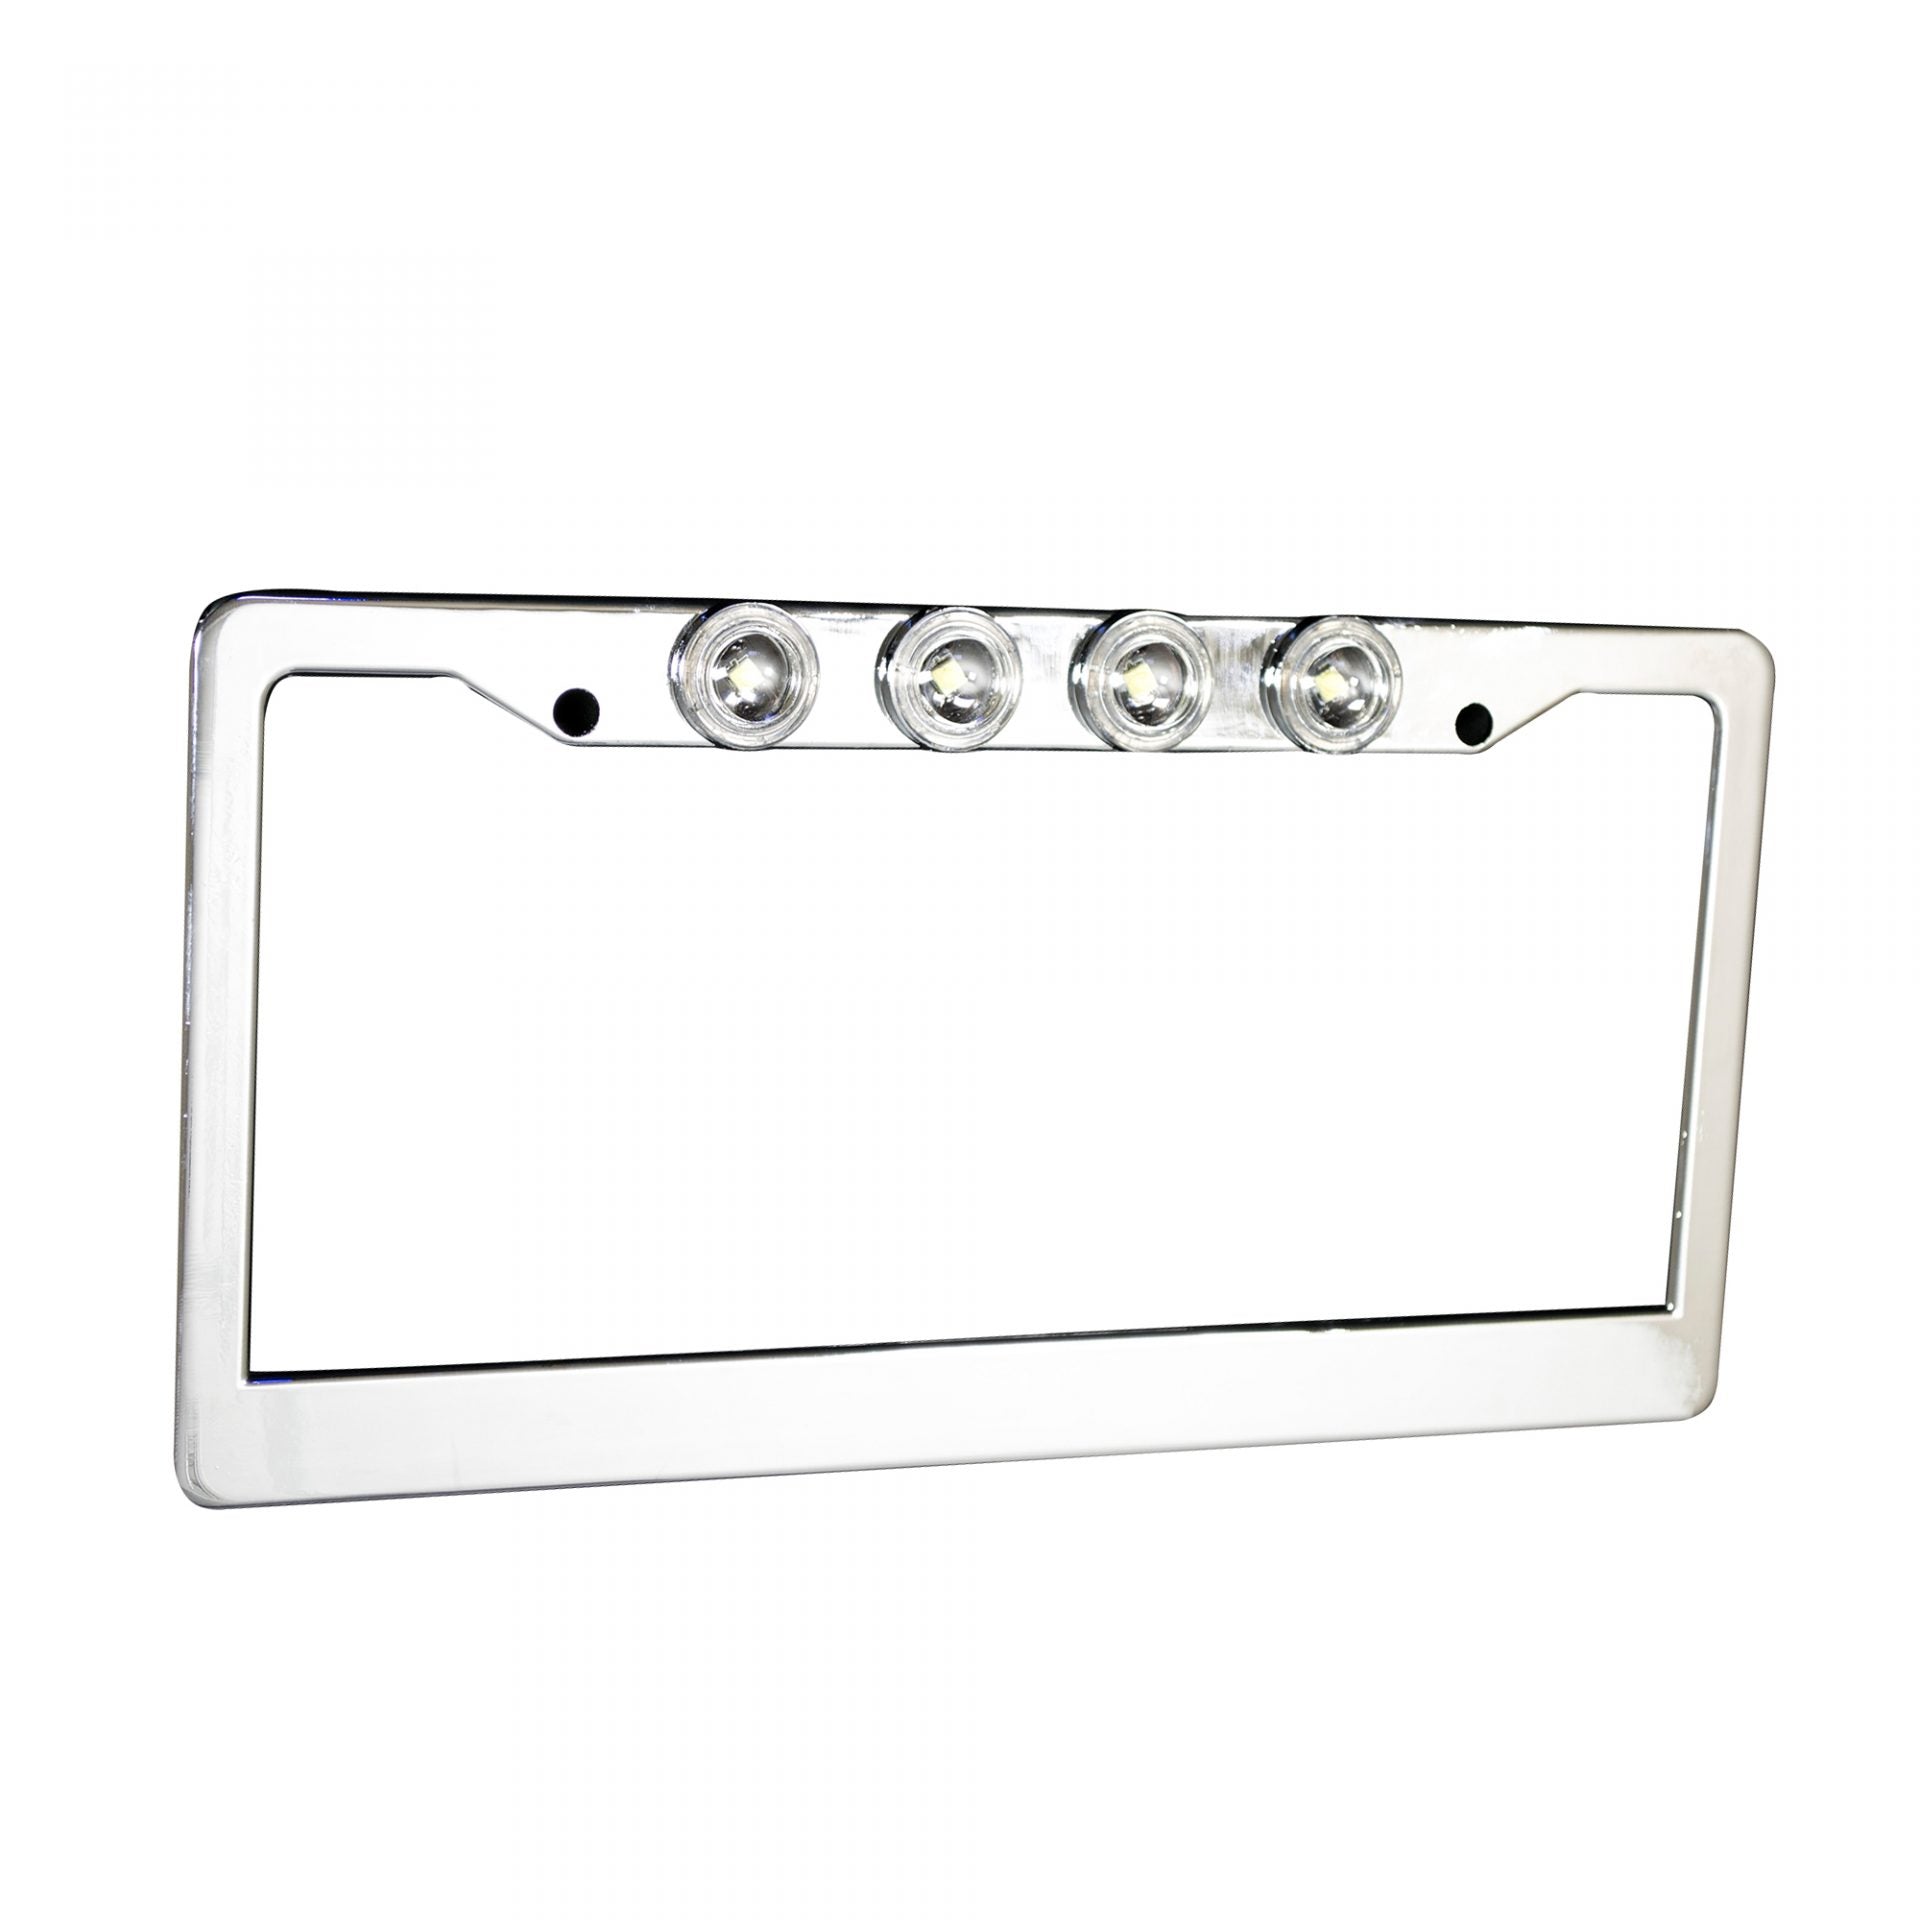 Brushed Aluminum License Plate Frame with Four 6000K XML CREE LED Reverse Lights